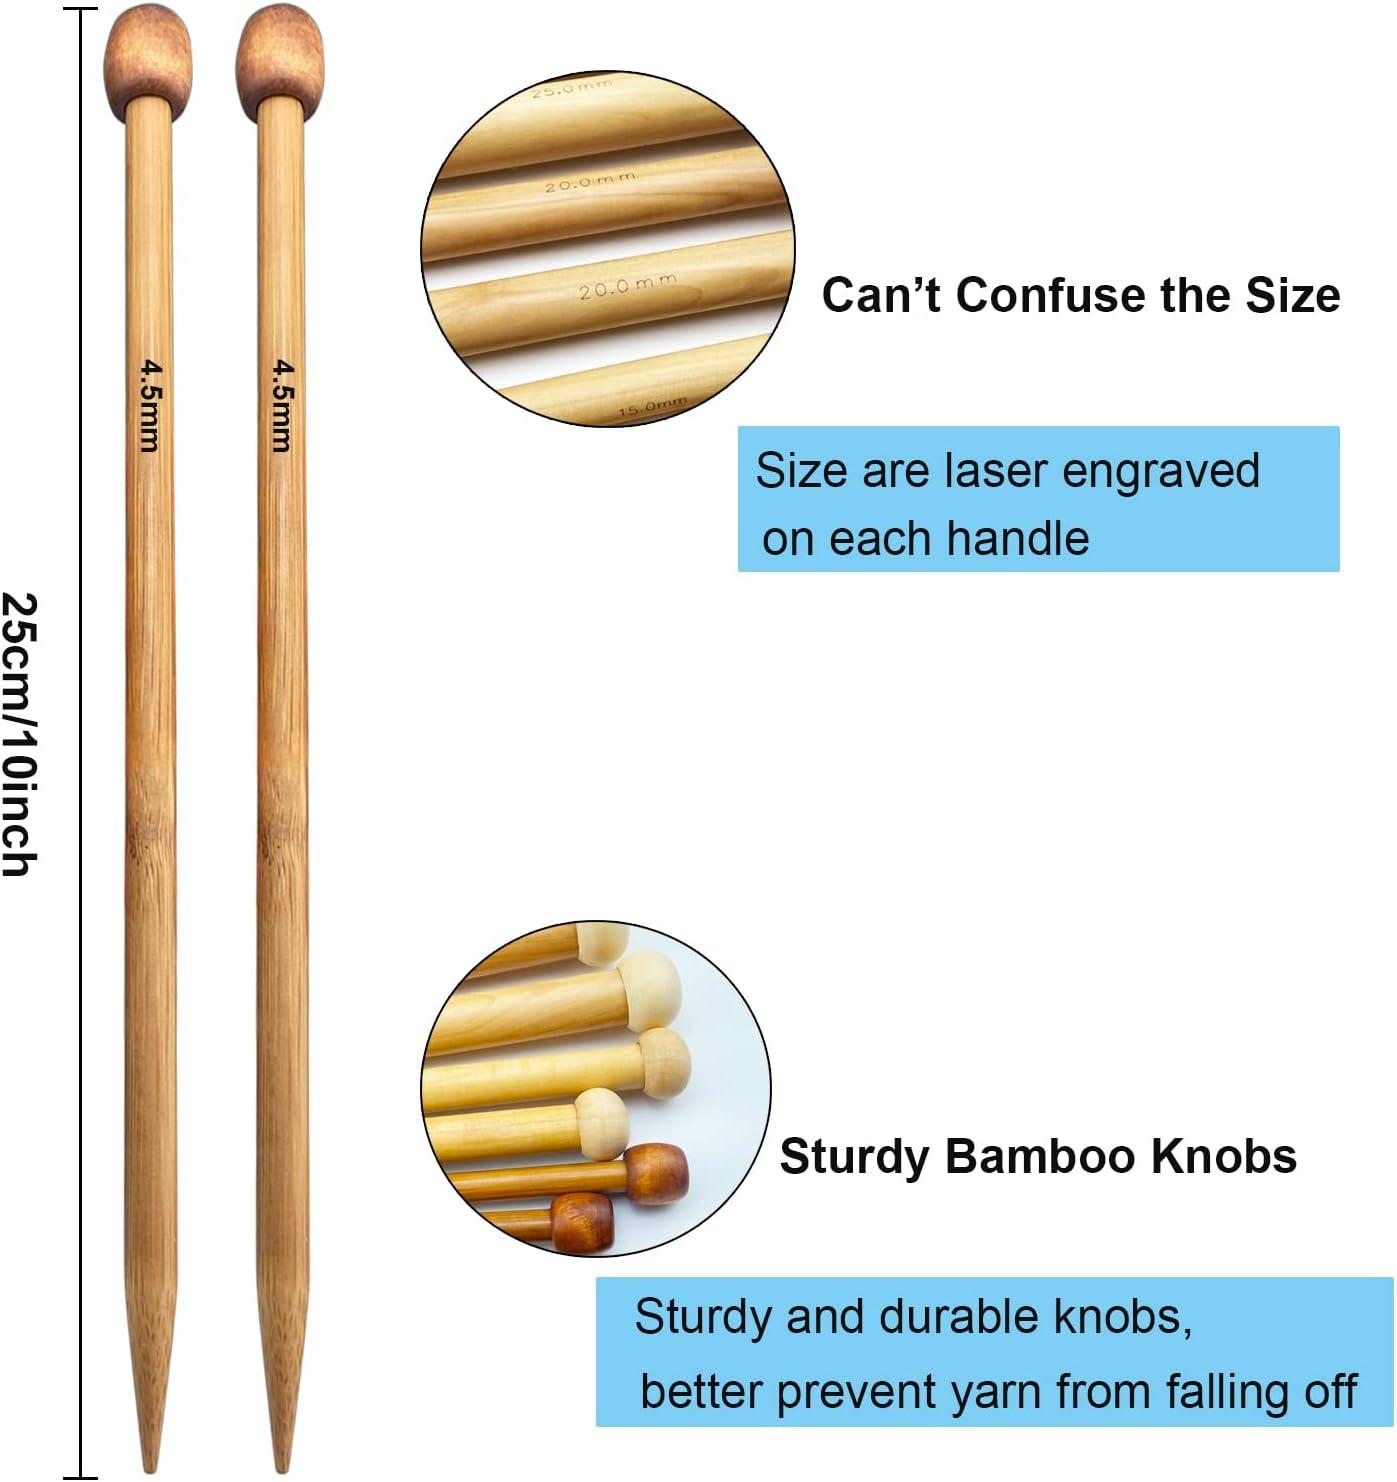 Size 10 US Bamboo Knitting Needles with Sheep Toppers